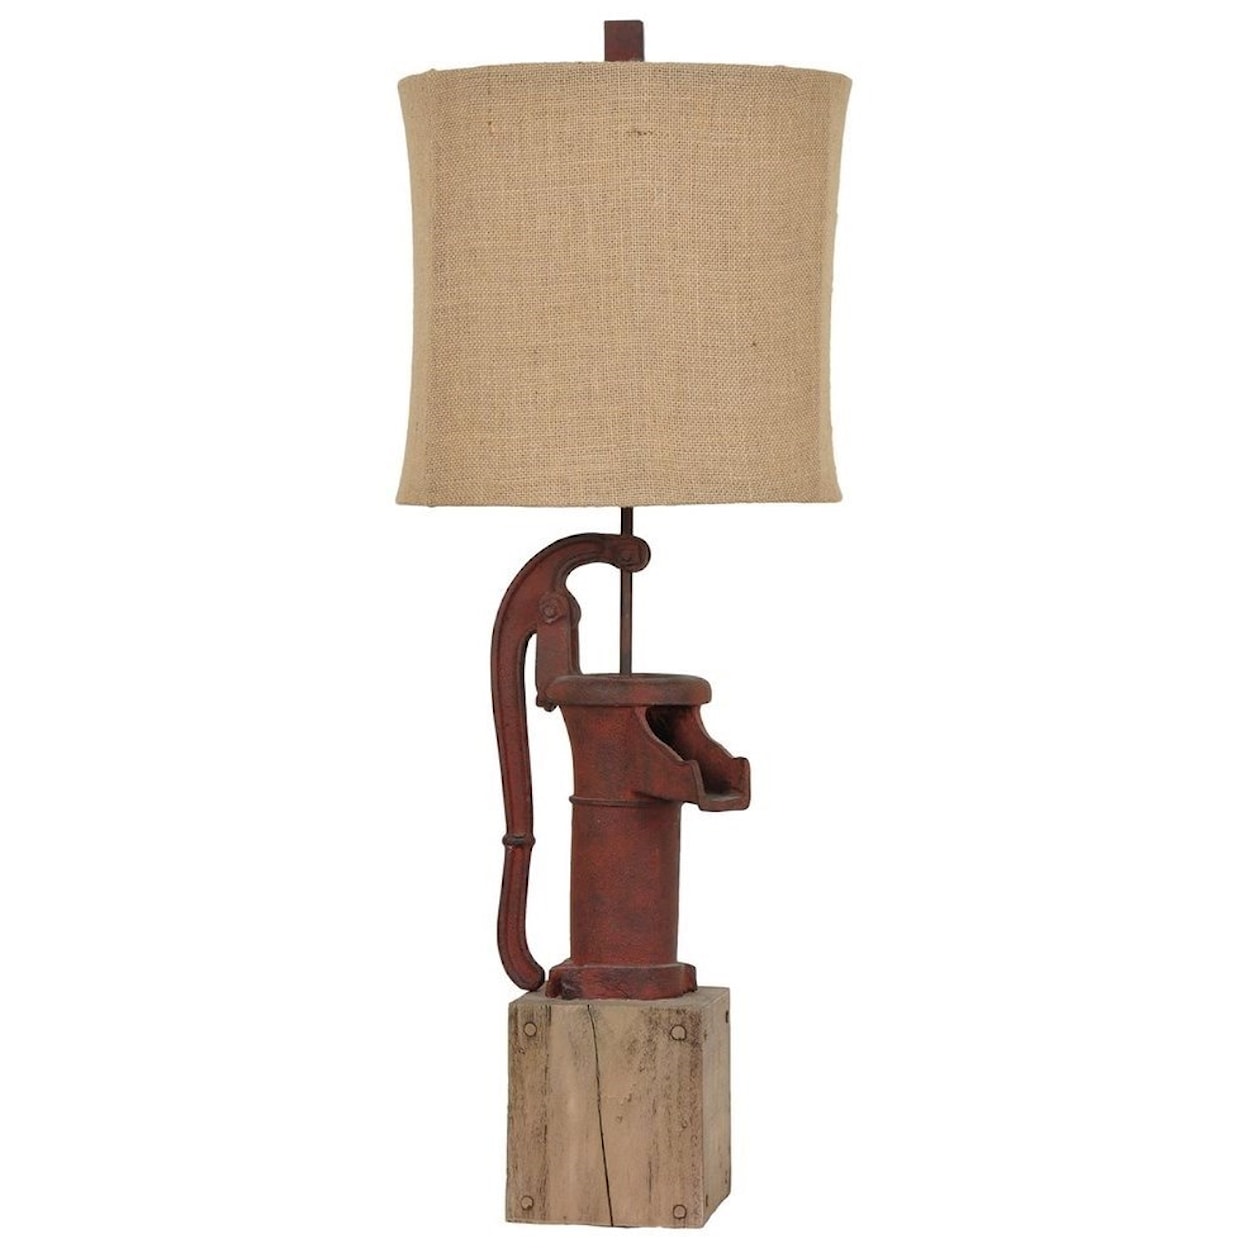 Crestview Collection Lighting Antique Pump Table Lamp